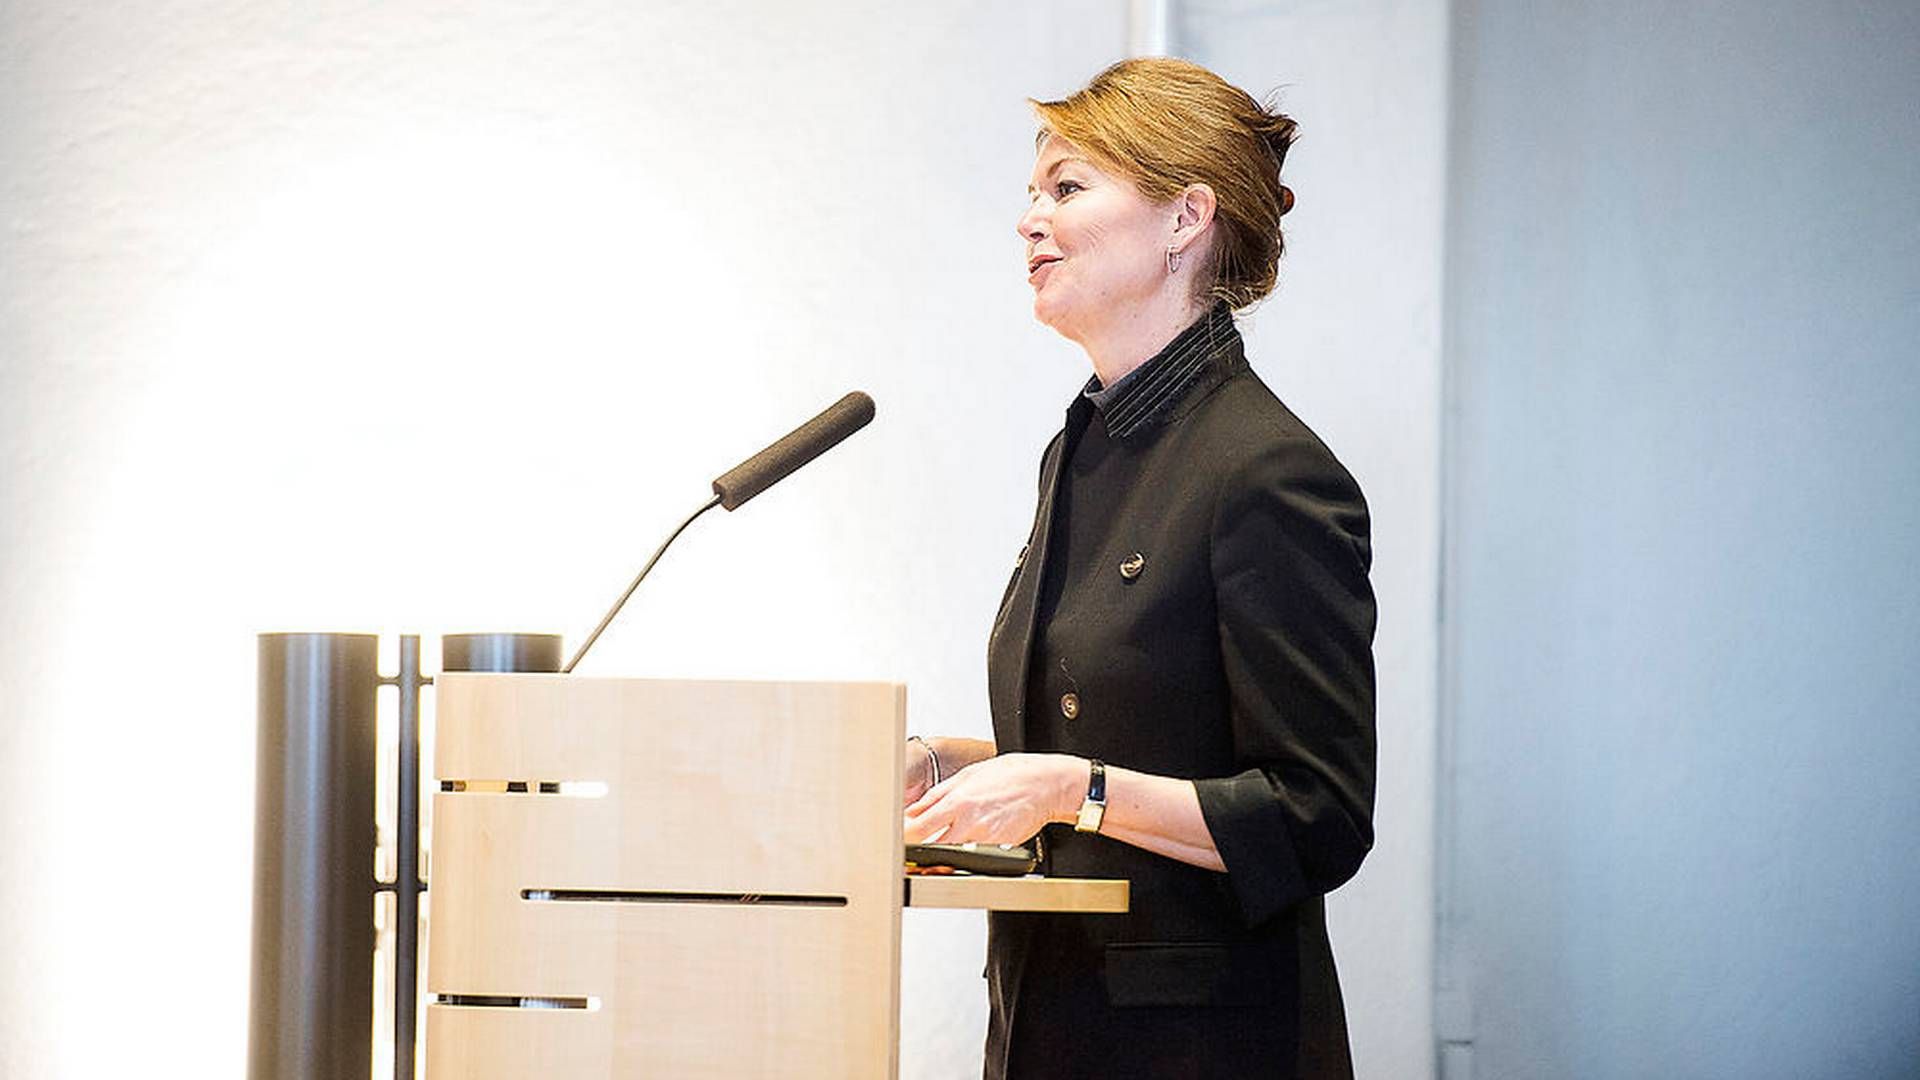 Lise Kingo speaking at the conference "The SDGs in the Arctic: Local and Global Perspectives" Friday 1. December,2017. | Photo: Ritzau Scanpix/Sarah Christine Nørgaard